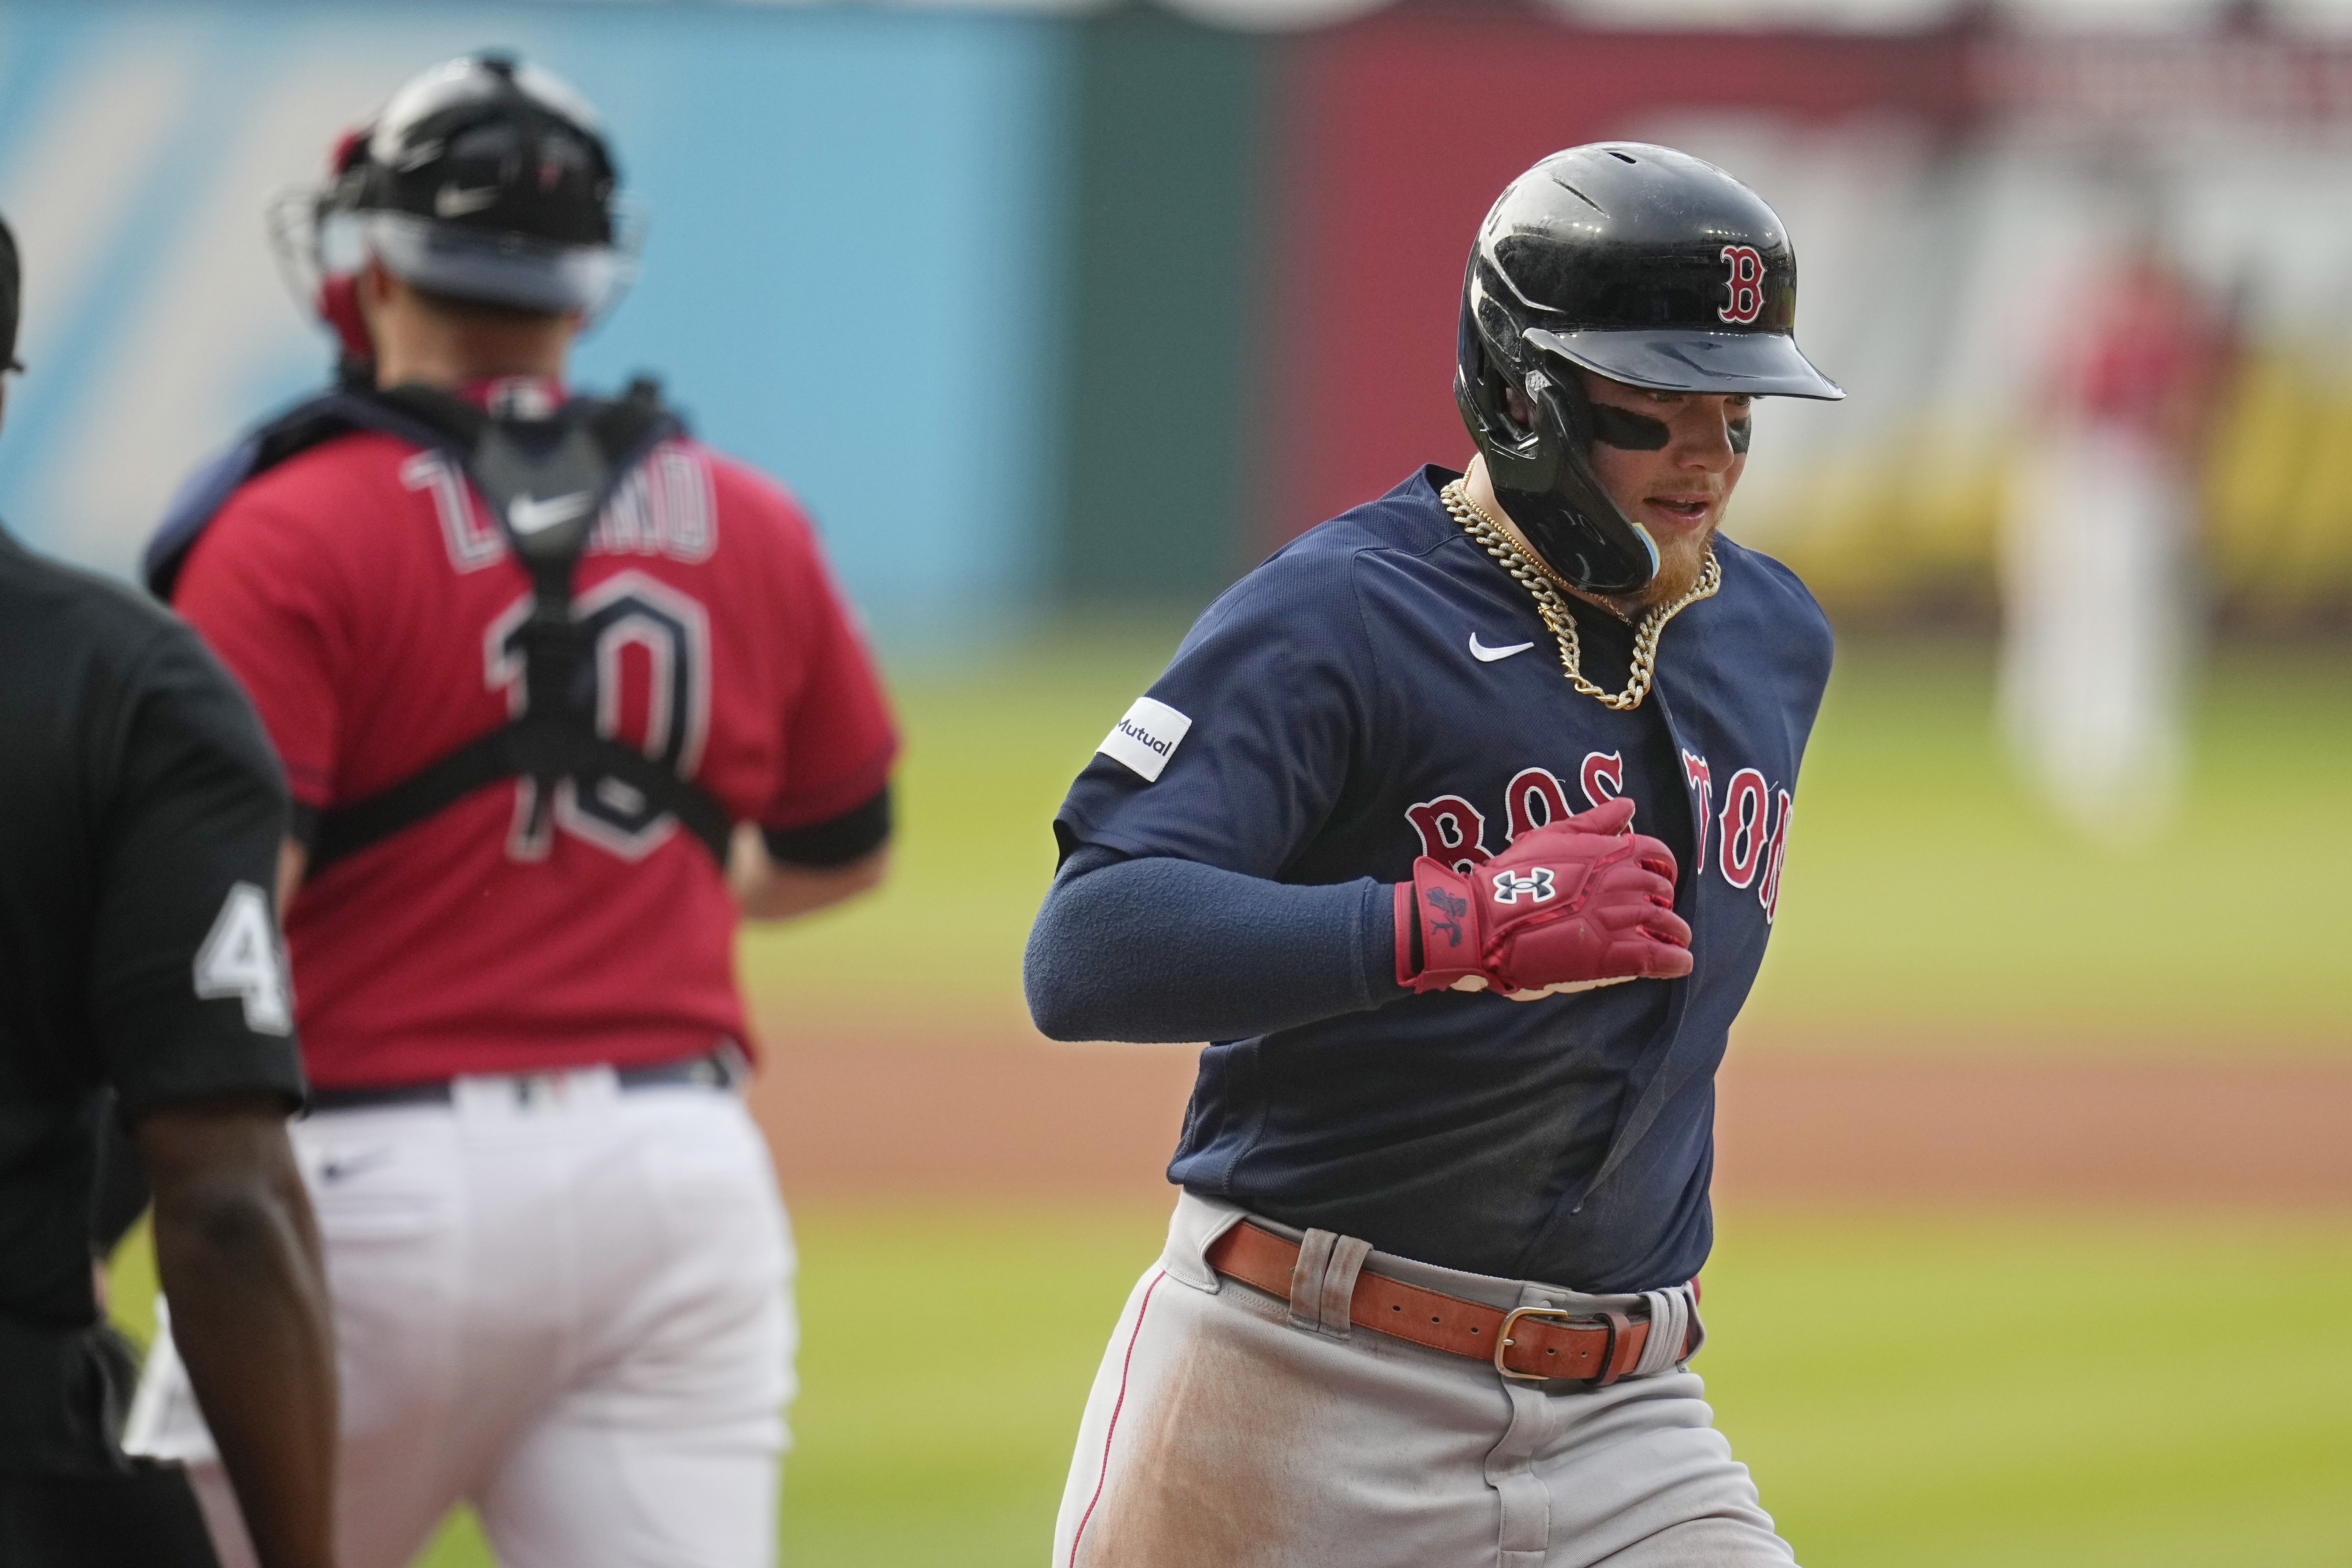 Red Sox losses mount, but only on the field - The Boston Globe